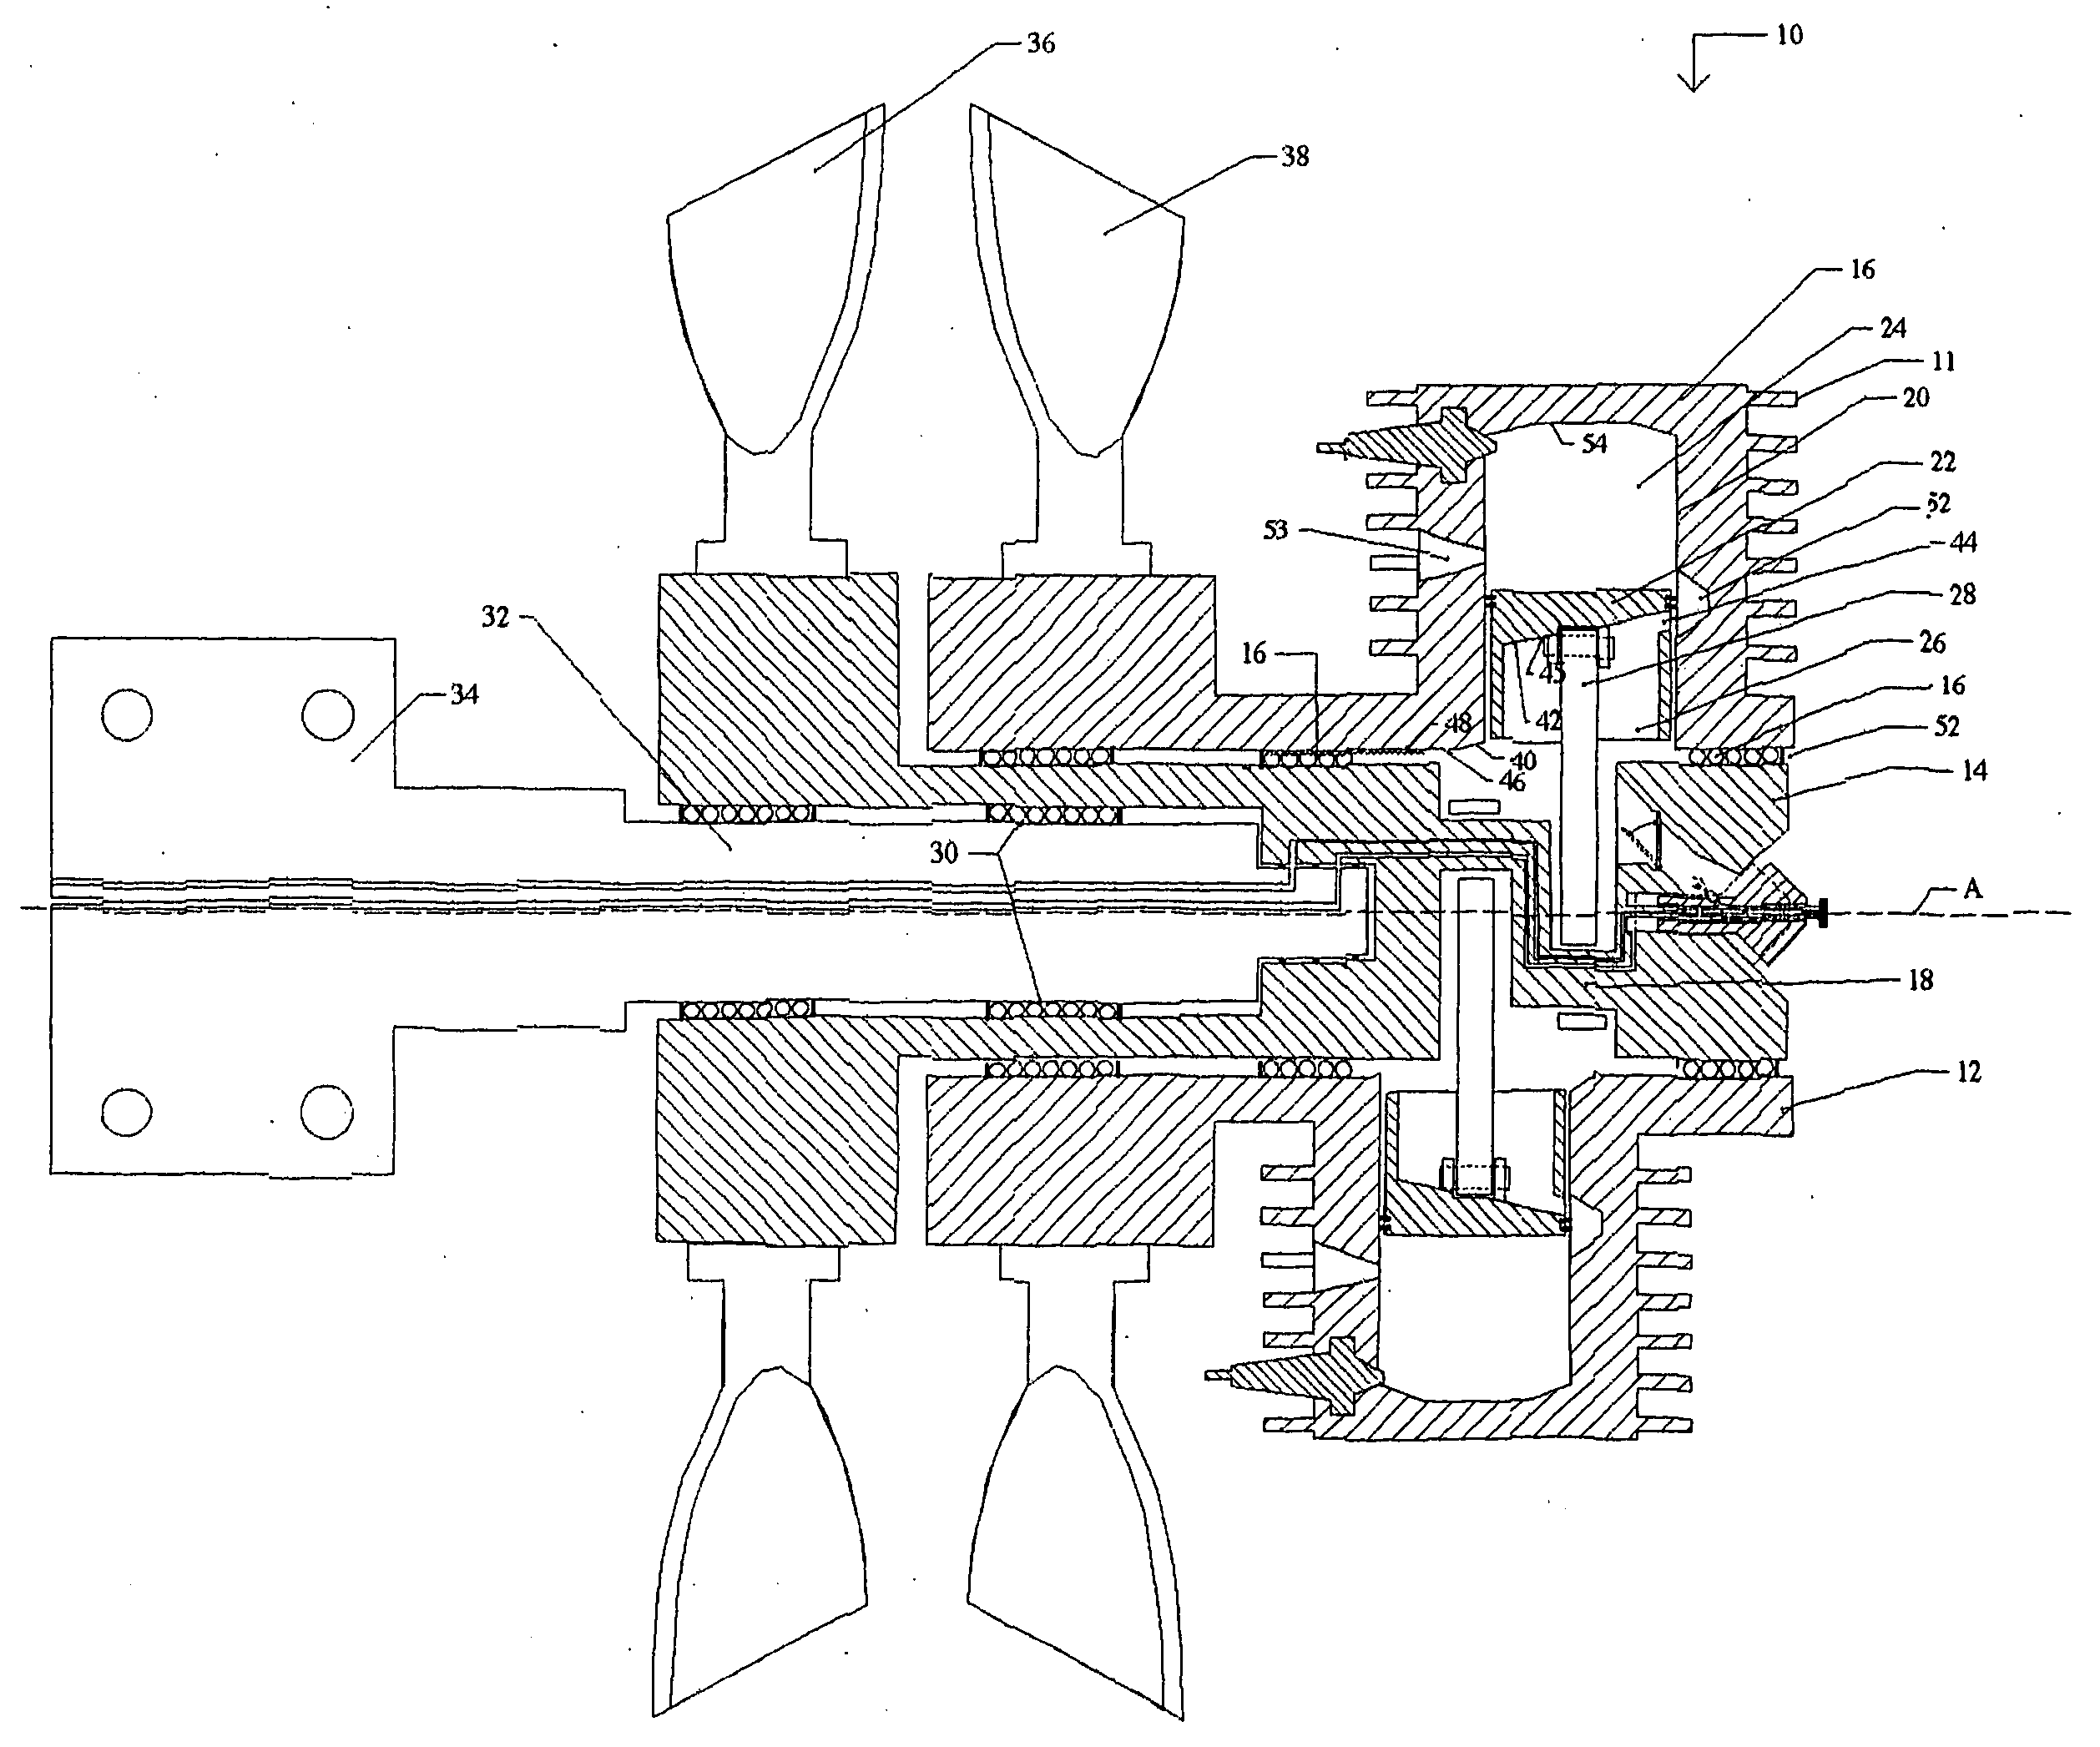 Two-cycle engine for counter-rotation especially for aviation applications